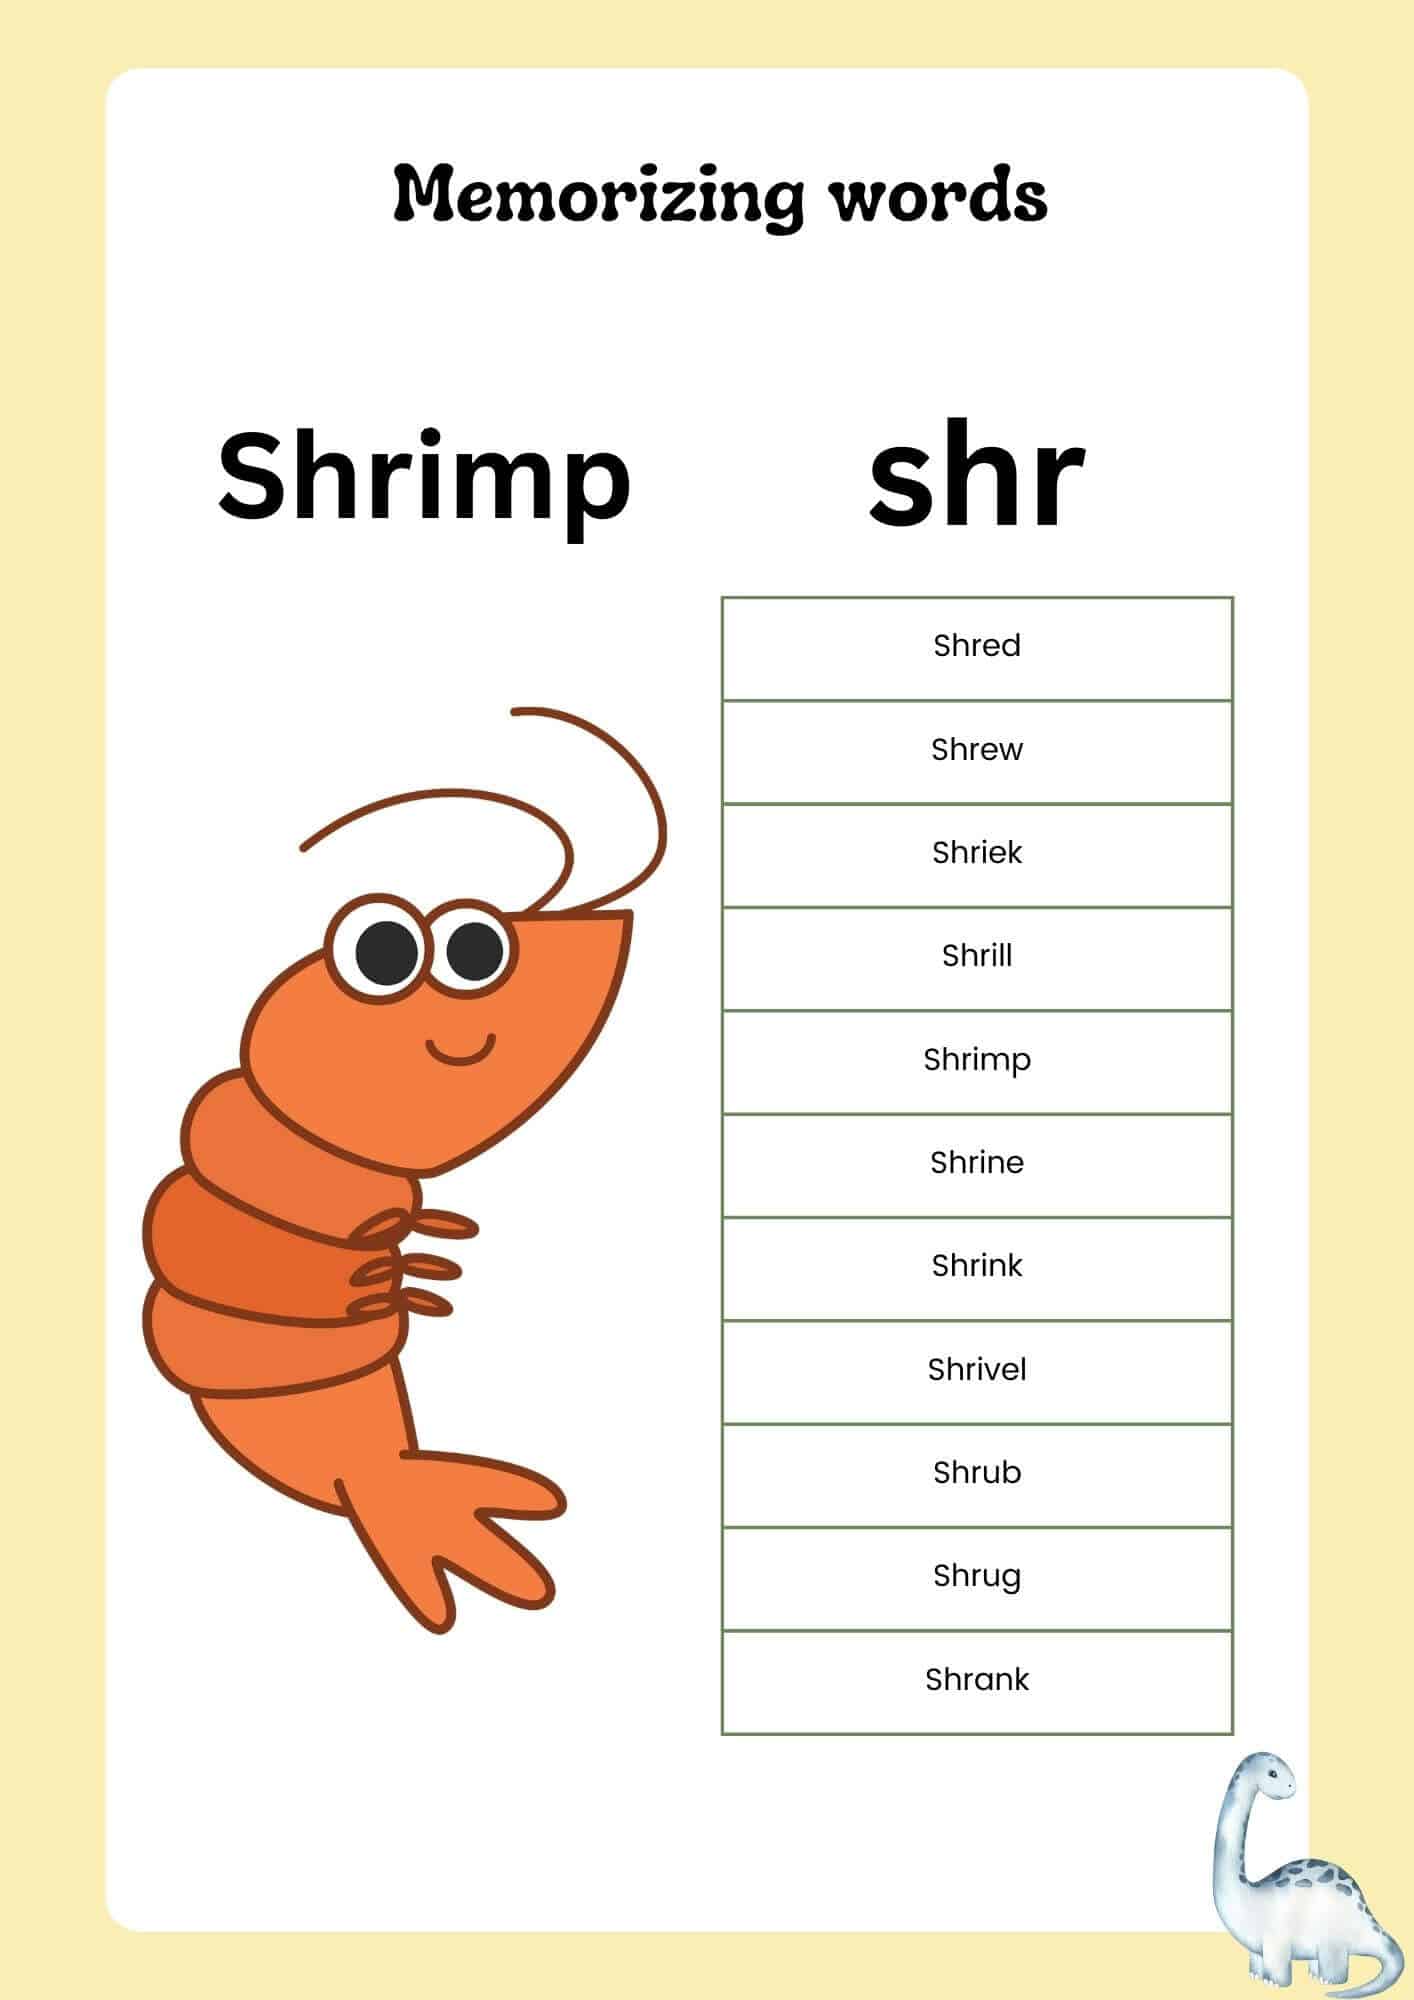 Using Memorizing words to know Shr Words Examples